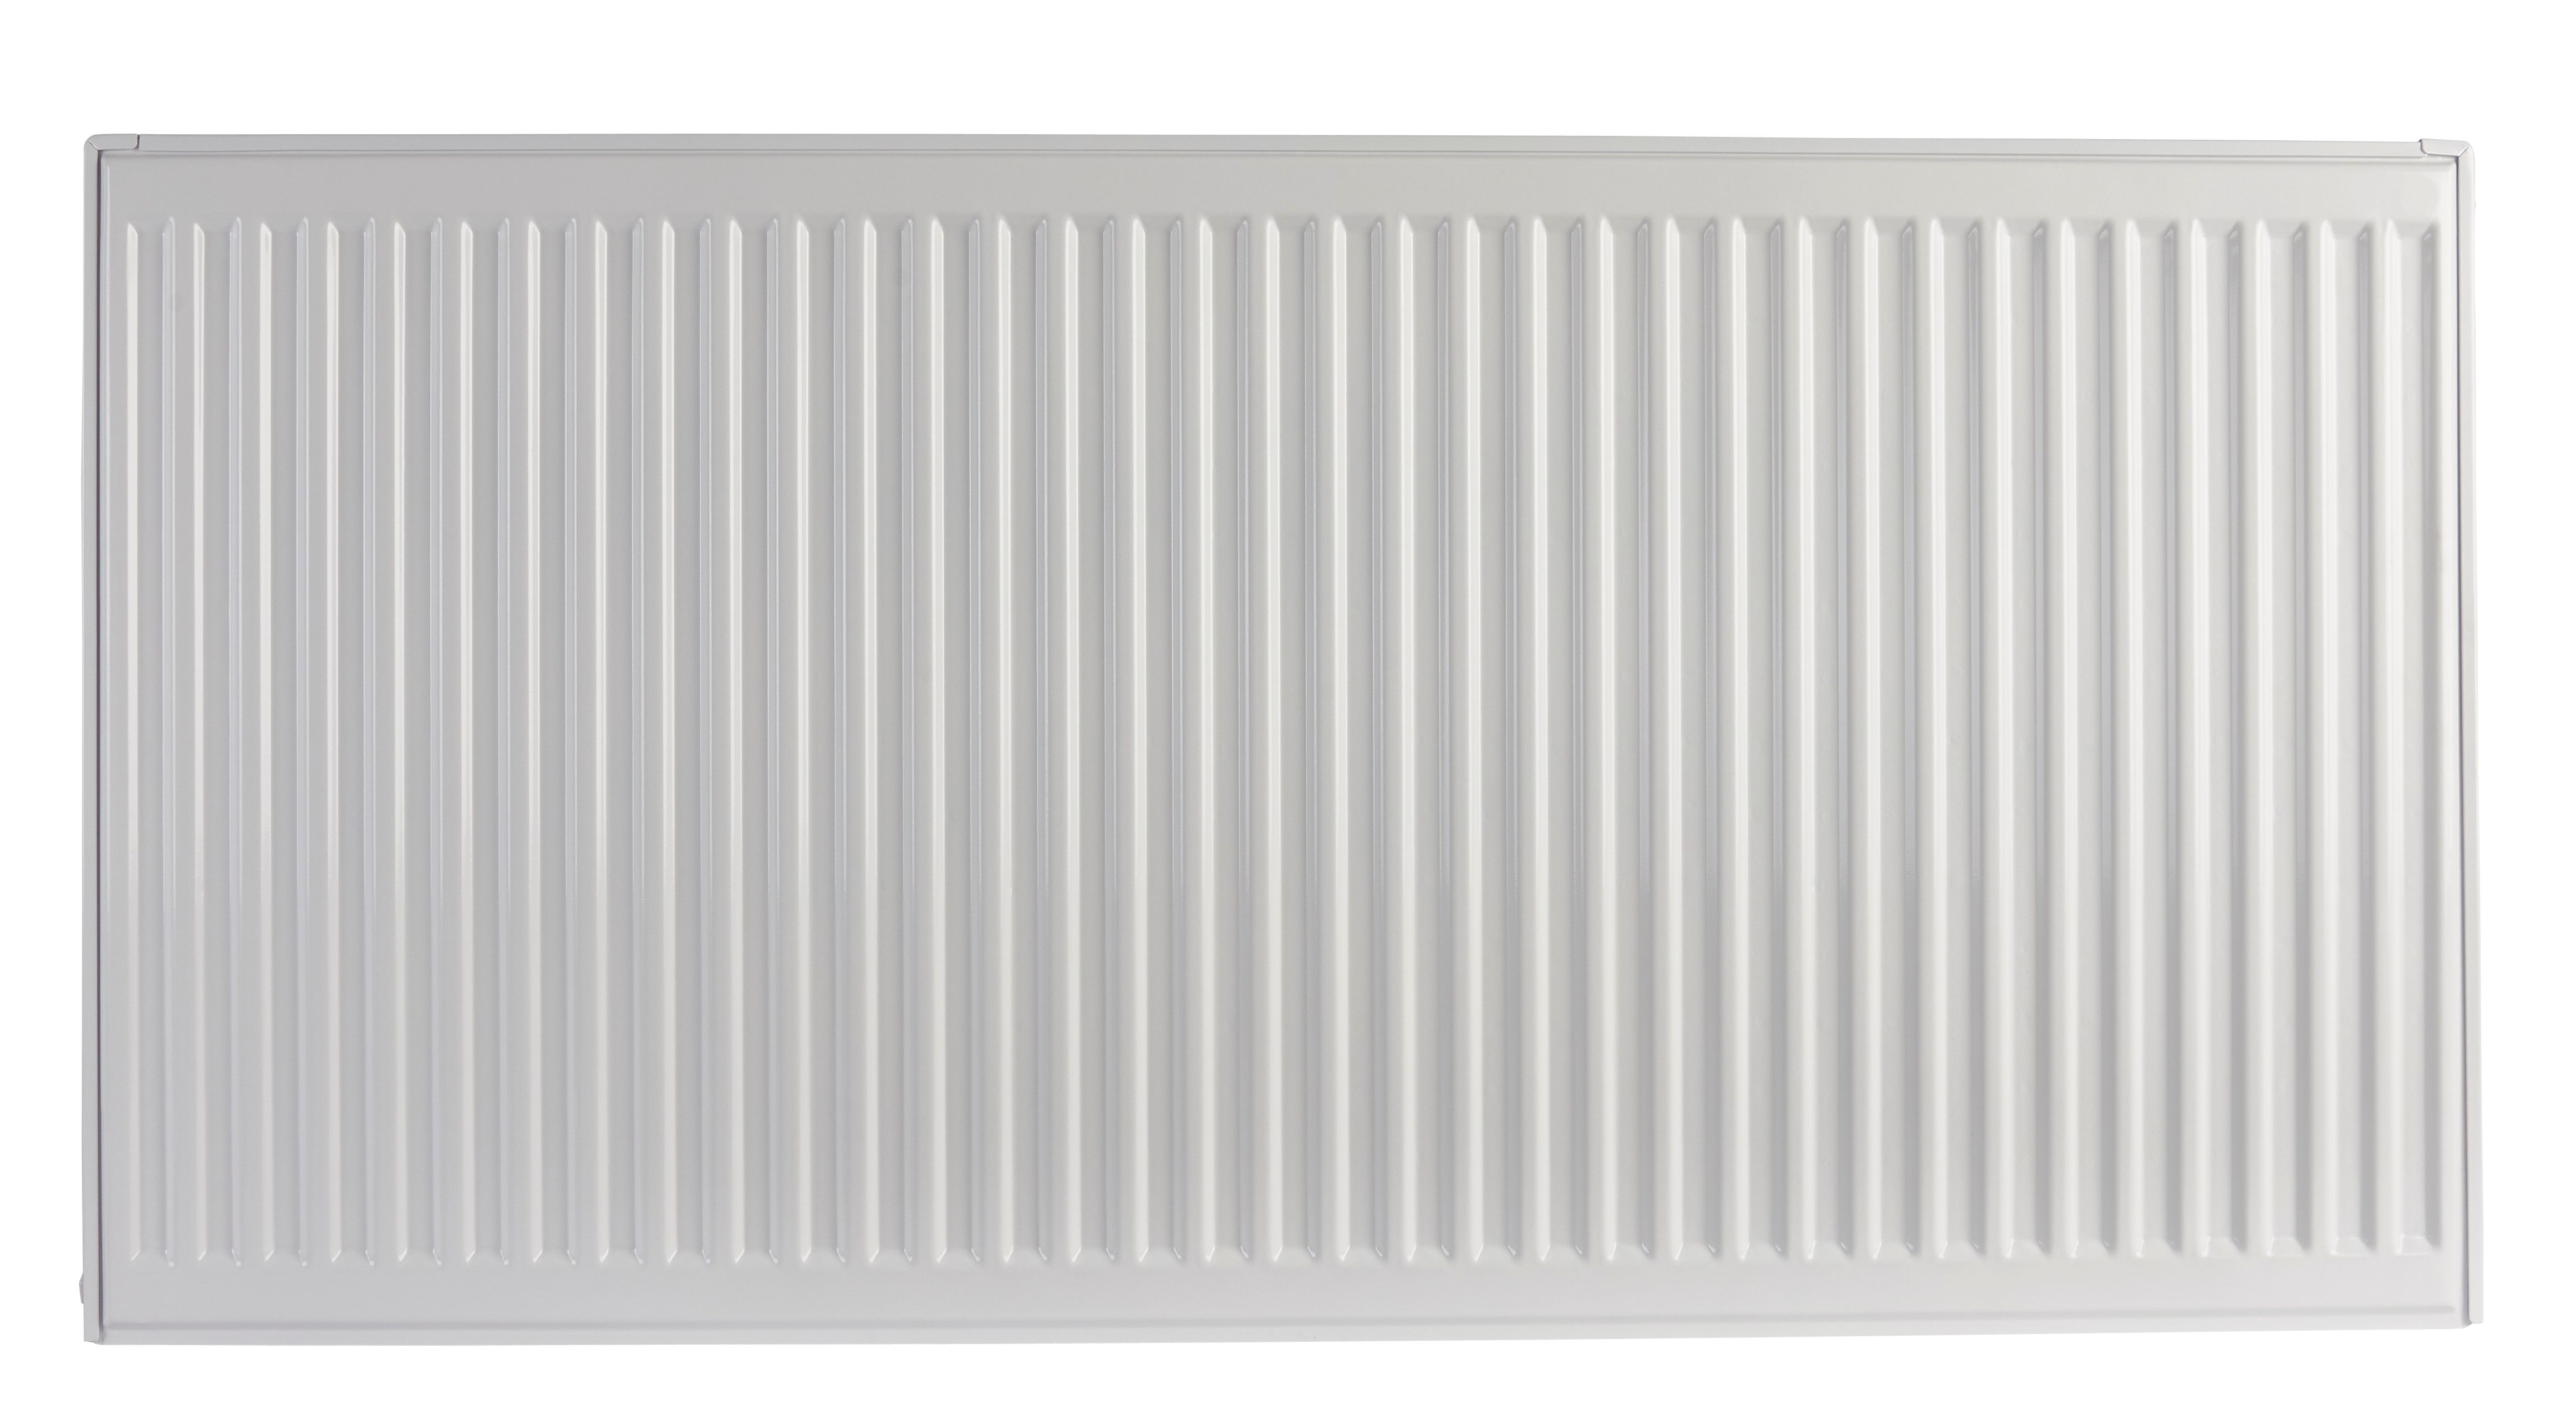 Image of Homeline by Stelrad 700 x 1200mm Type 11 Single Panel Single Convector Radiator